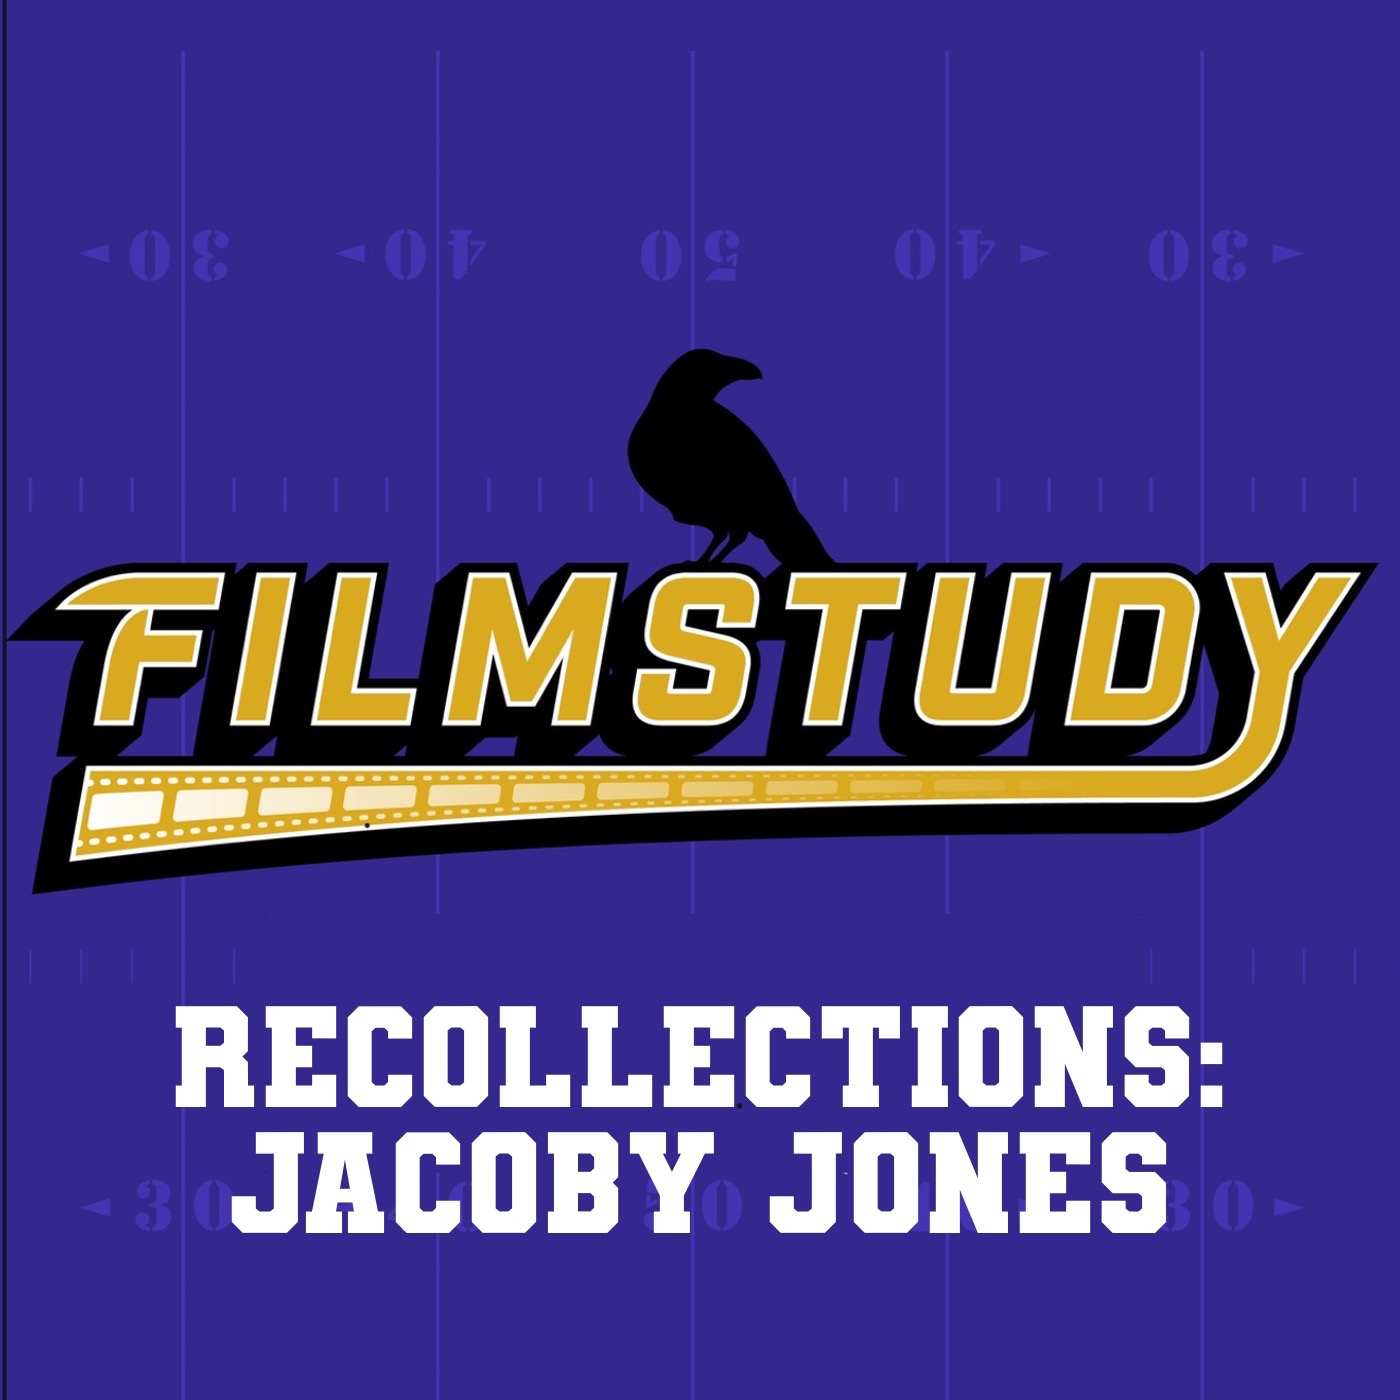 Recollections: Jacoby Jones